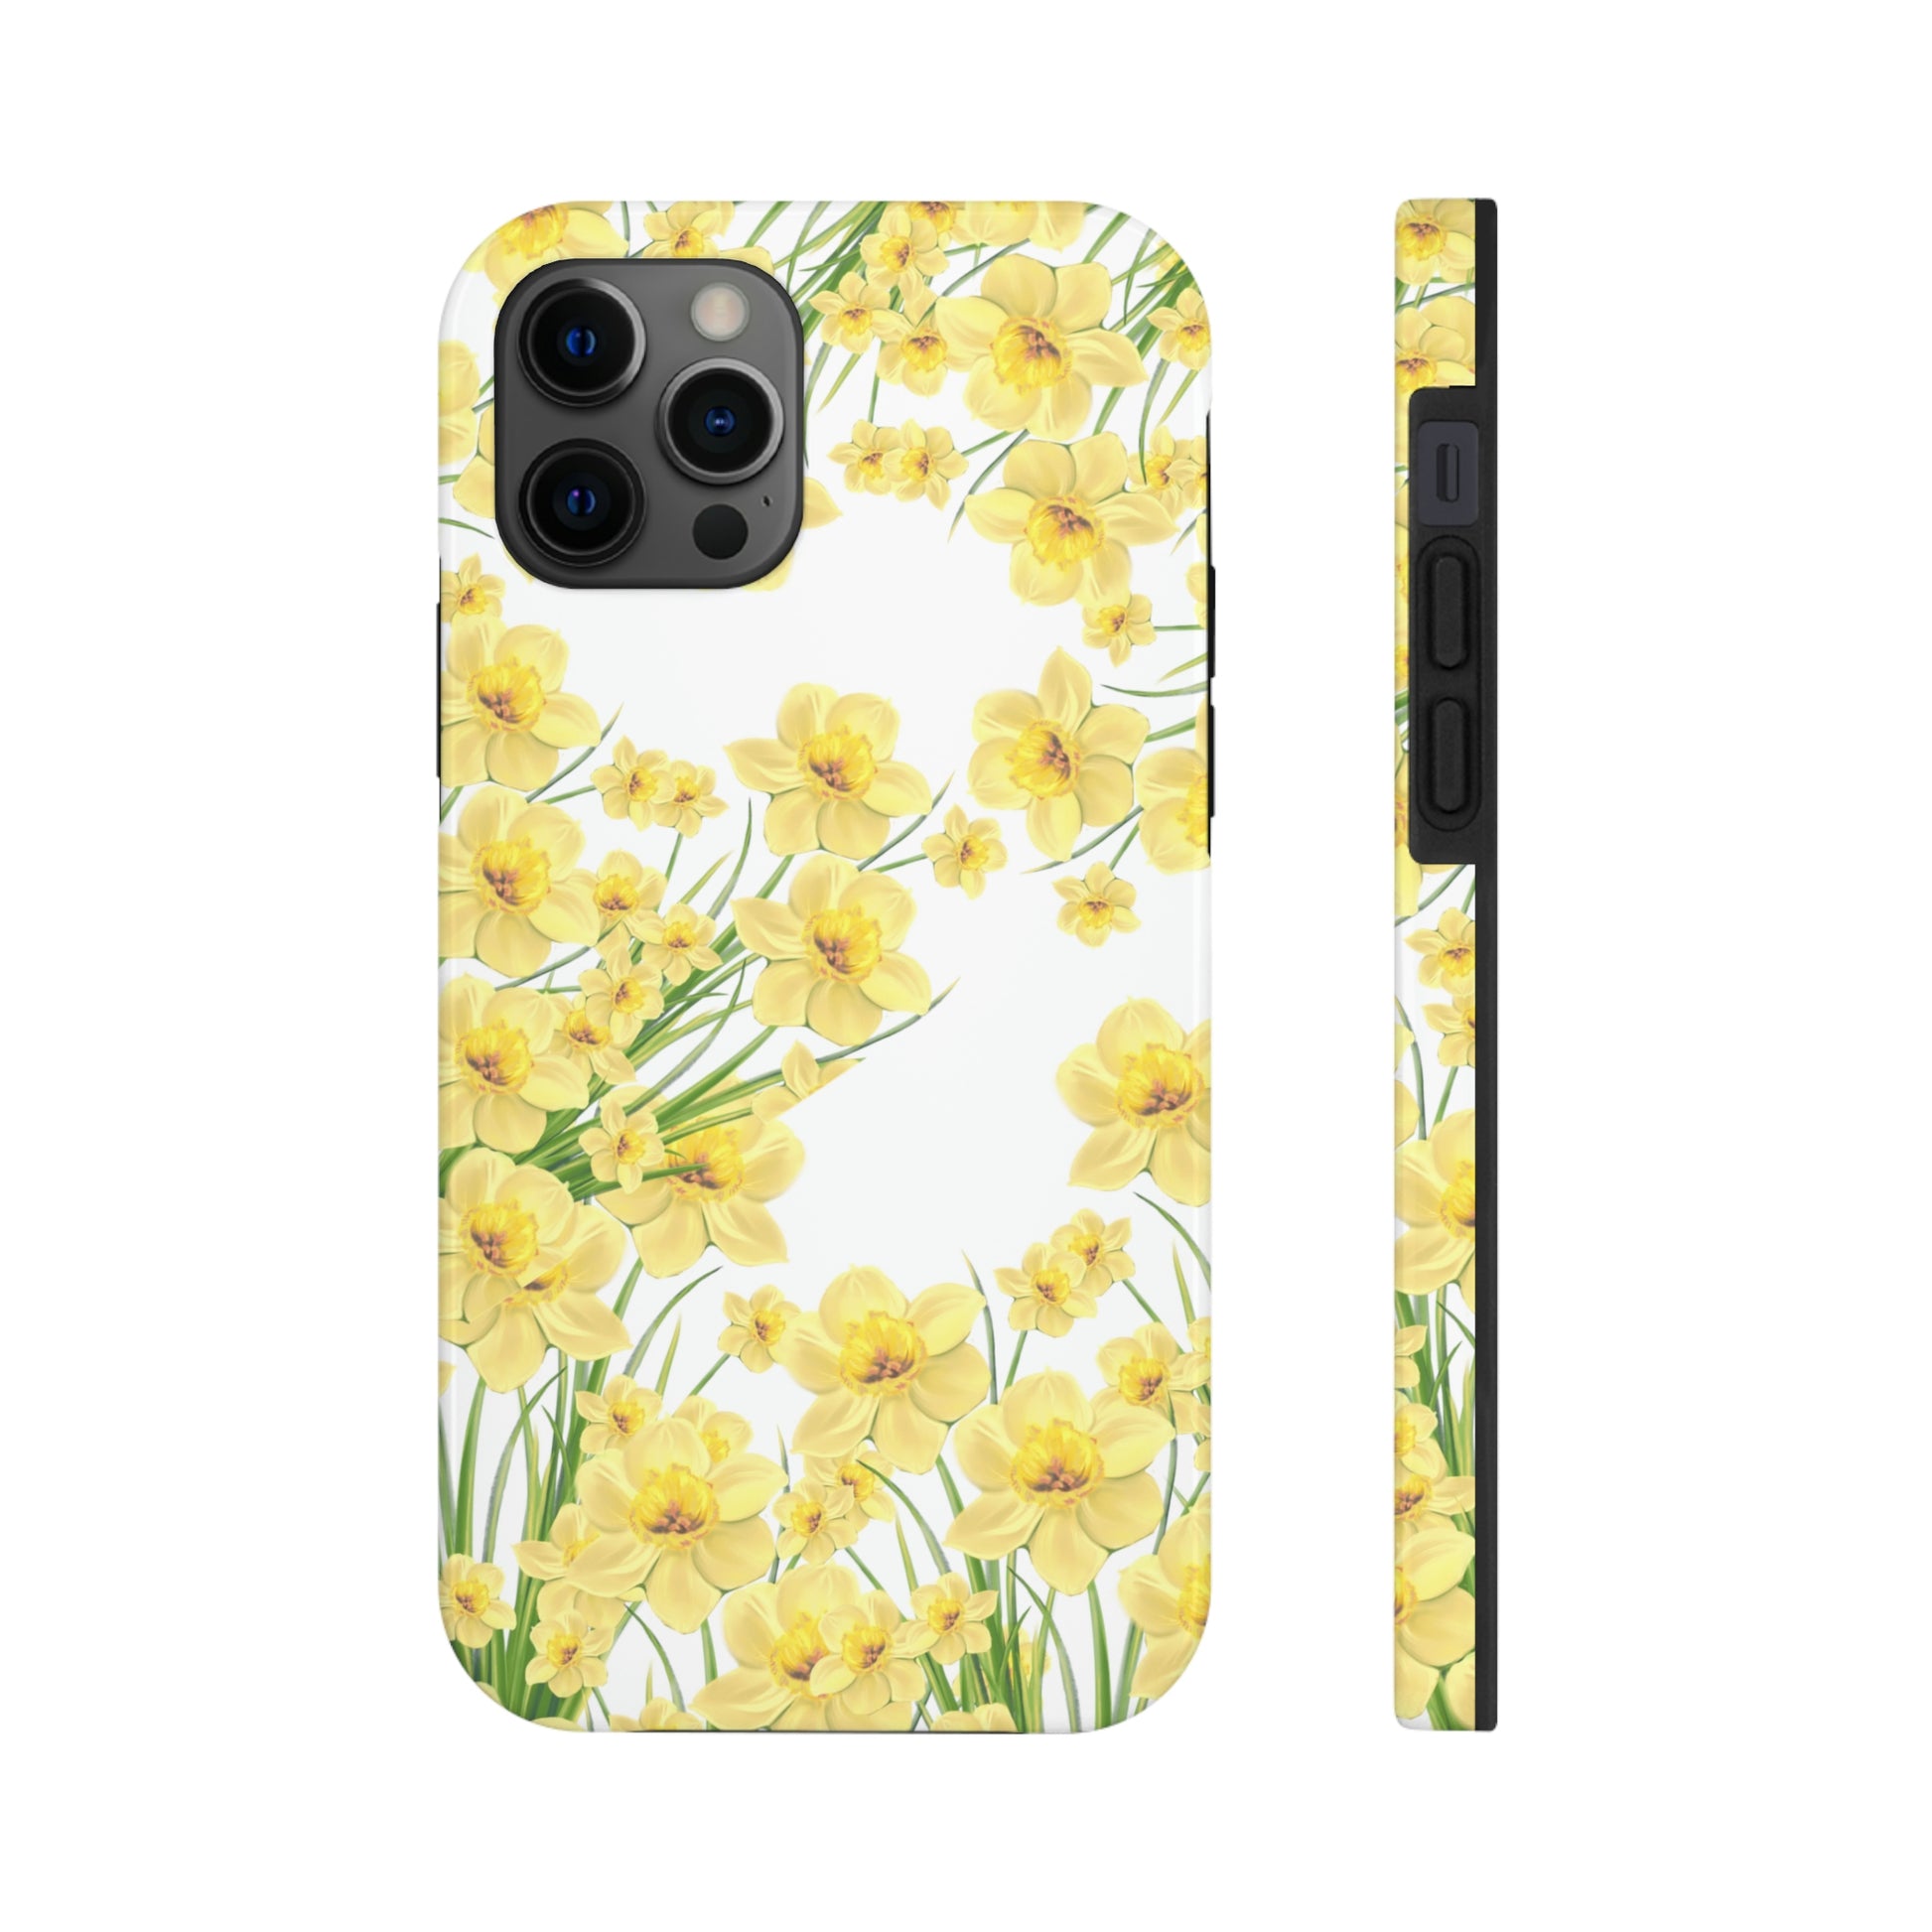 yellow daffodil iphone case for summer or spring fashion